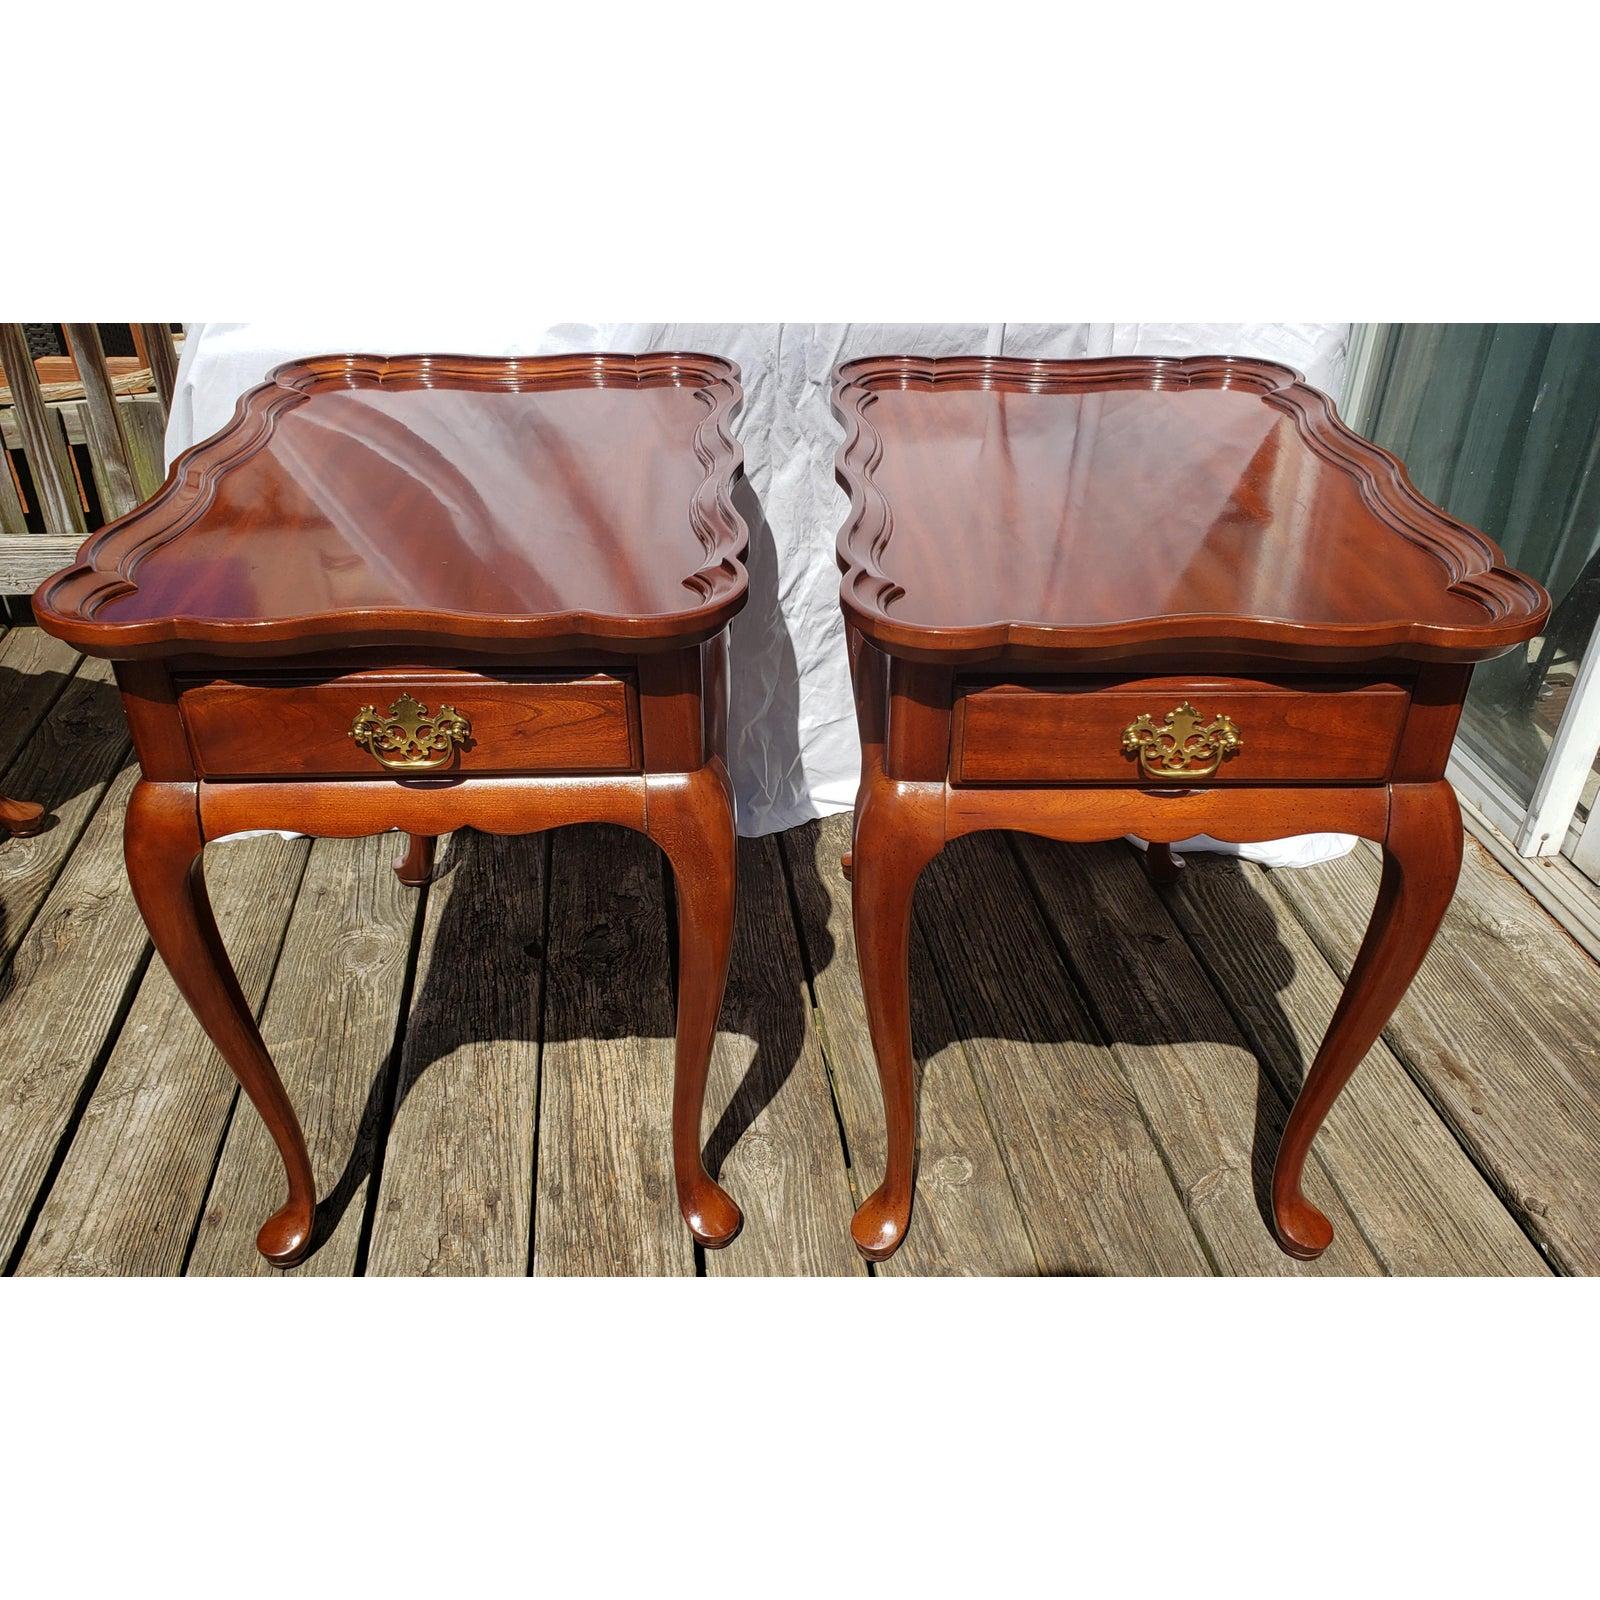 Pair of Superior Furniture solid walnut end table with scallop edge top.